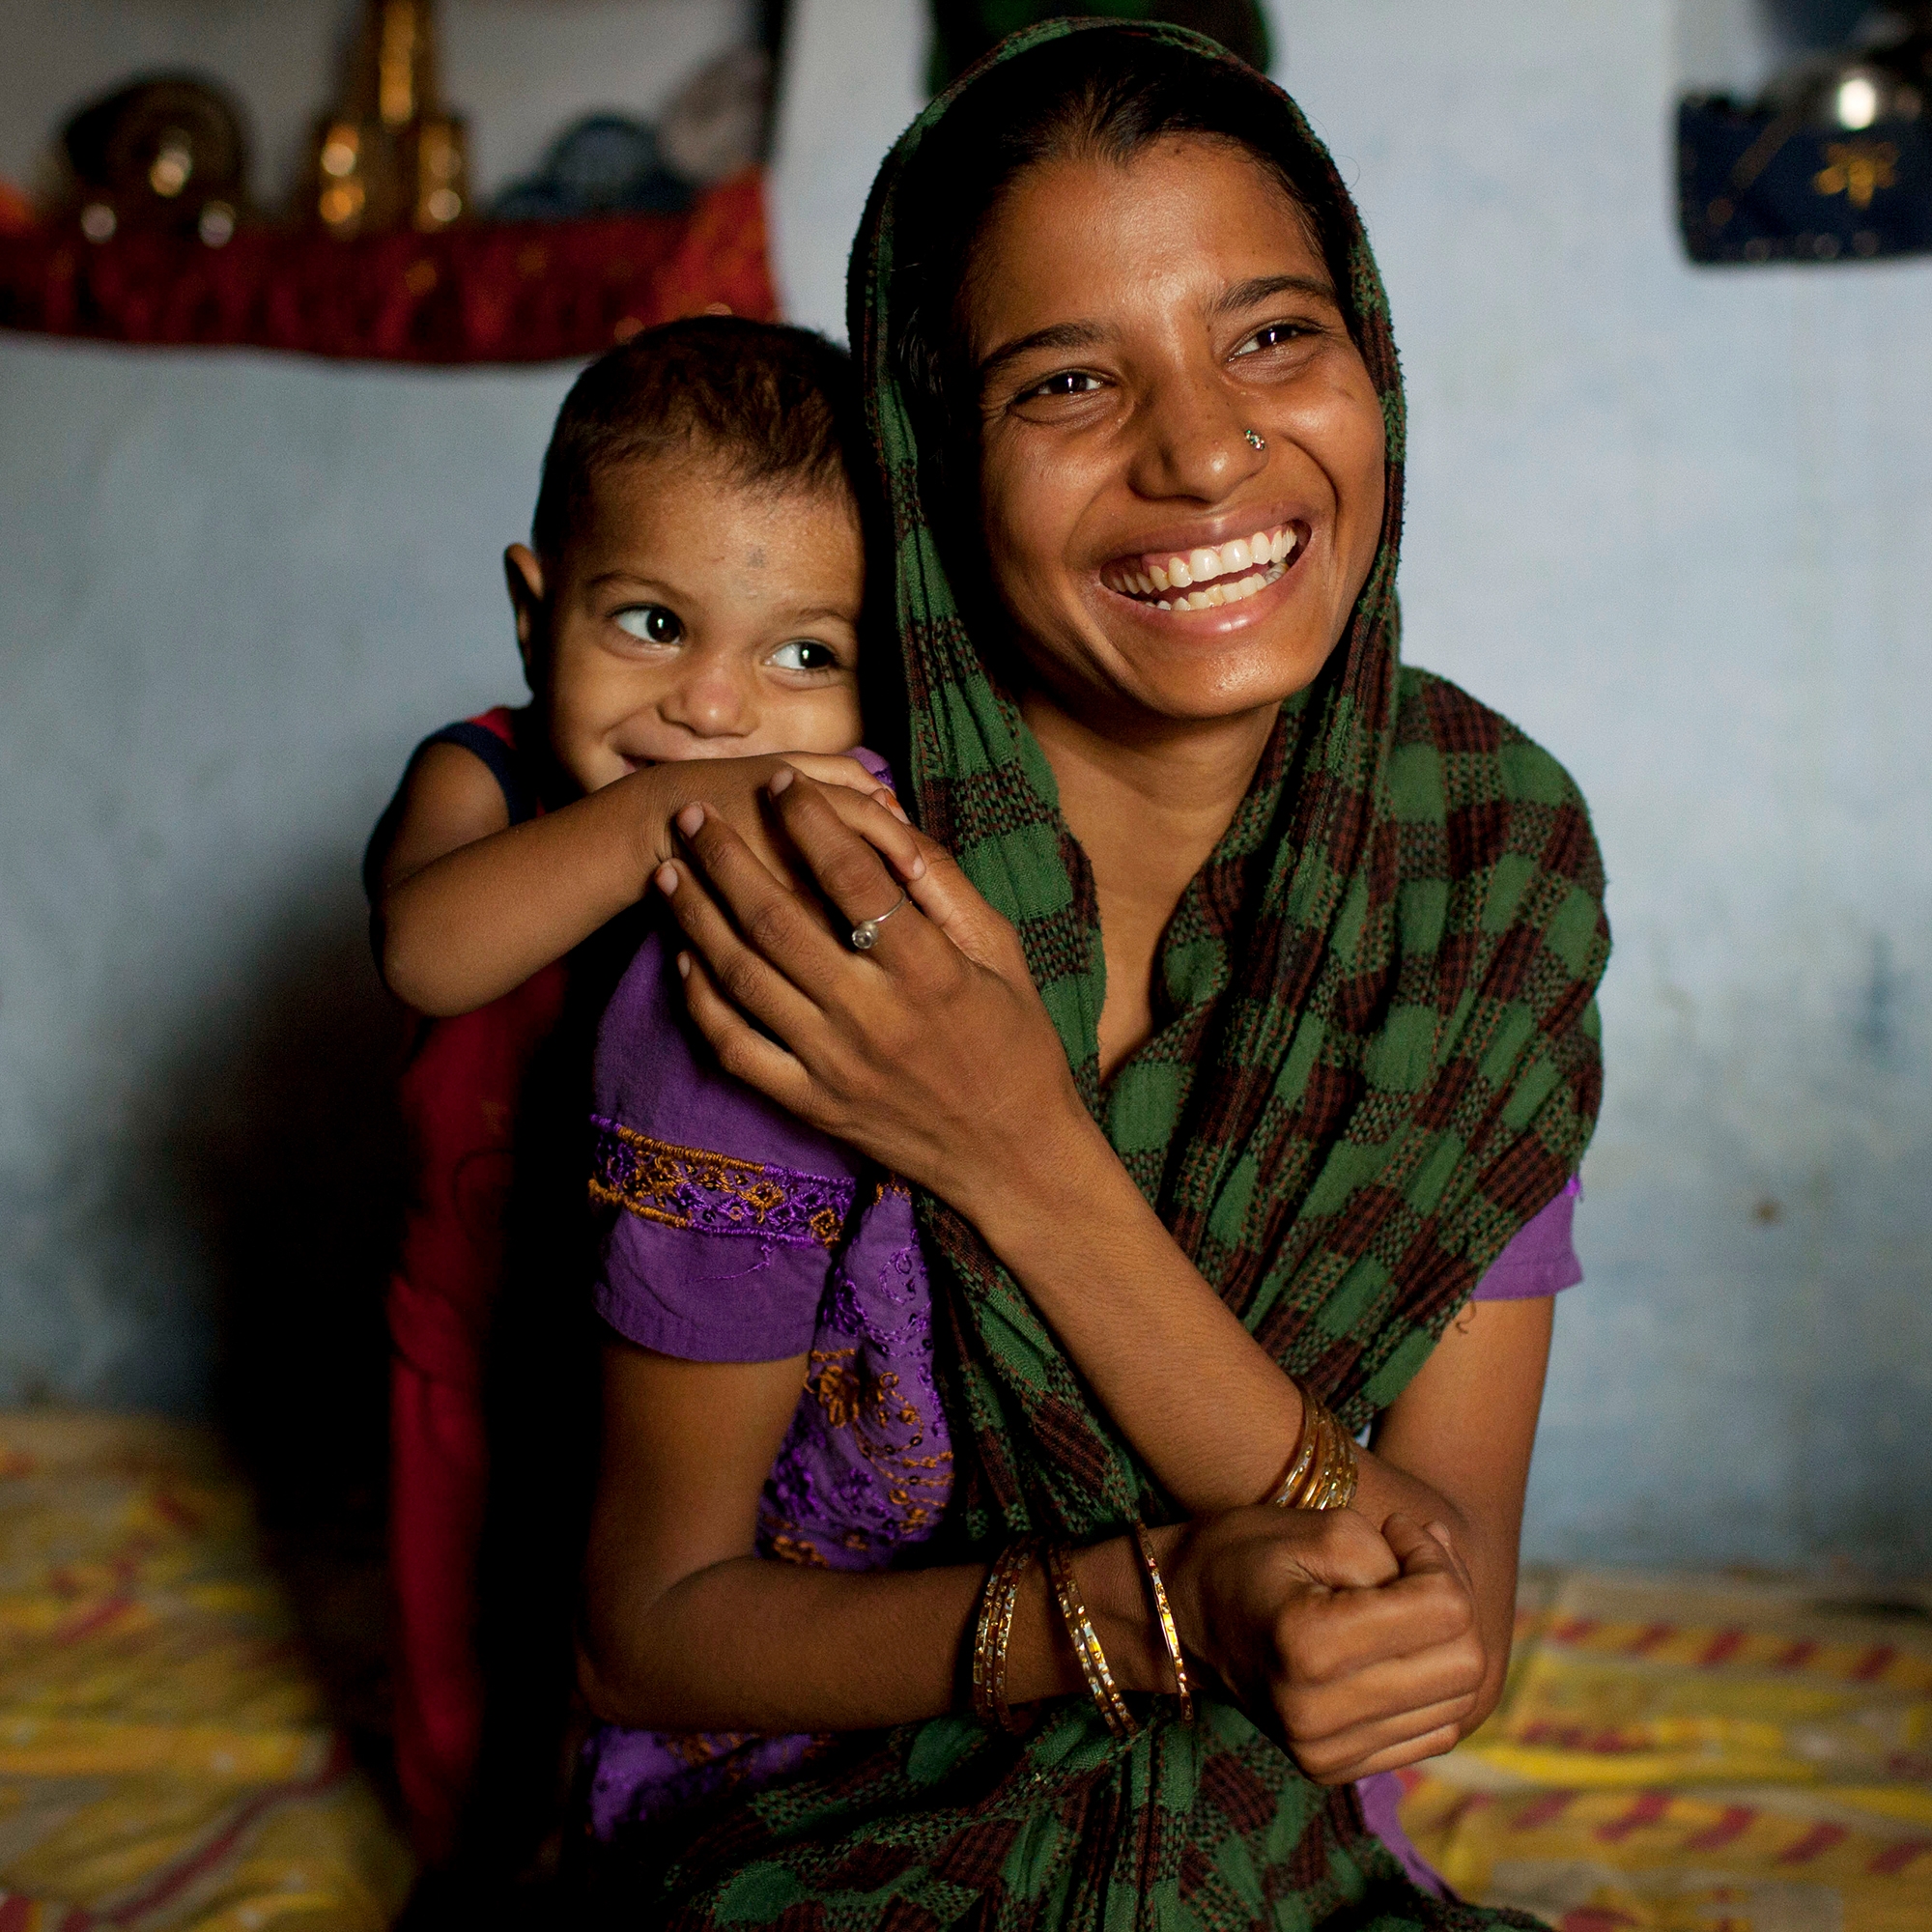 In India, a mother laughs while resting her hand on her young child's arm.